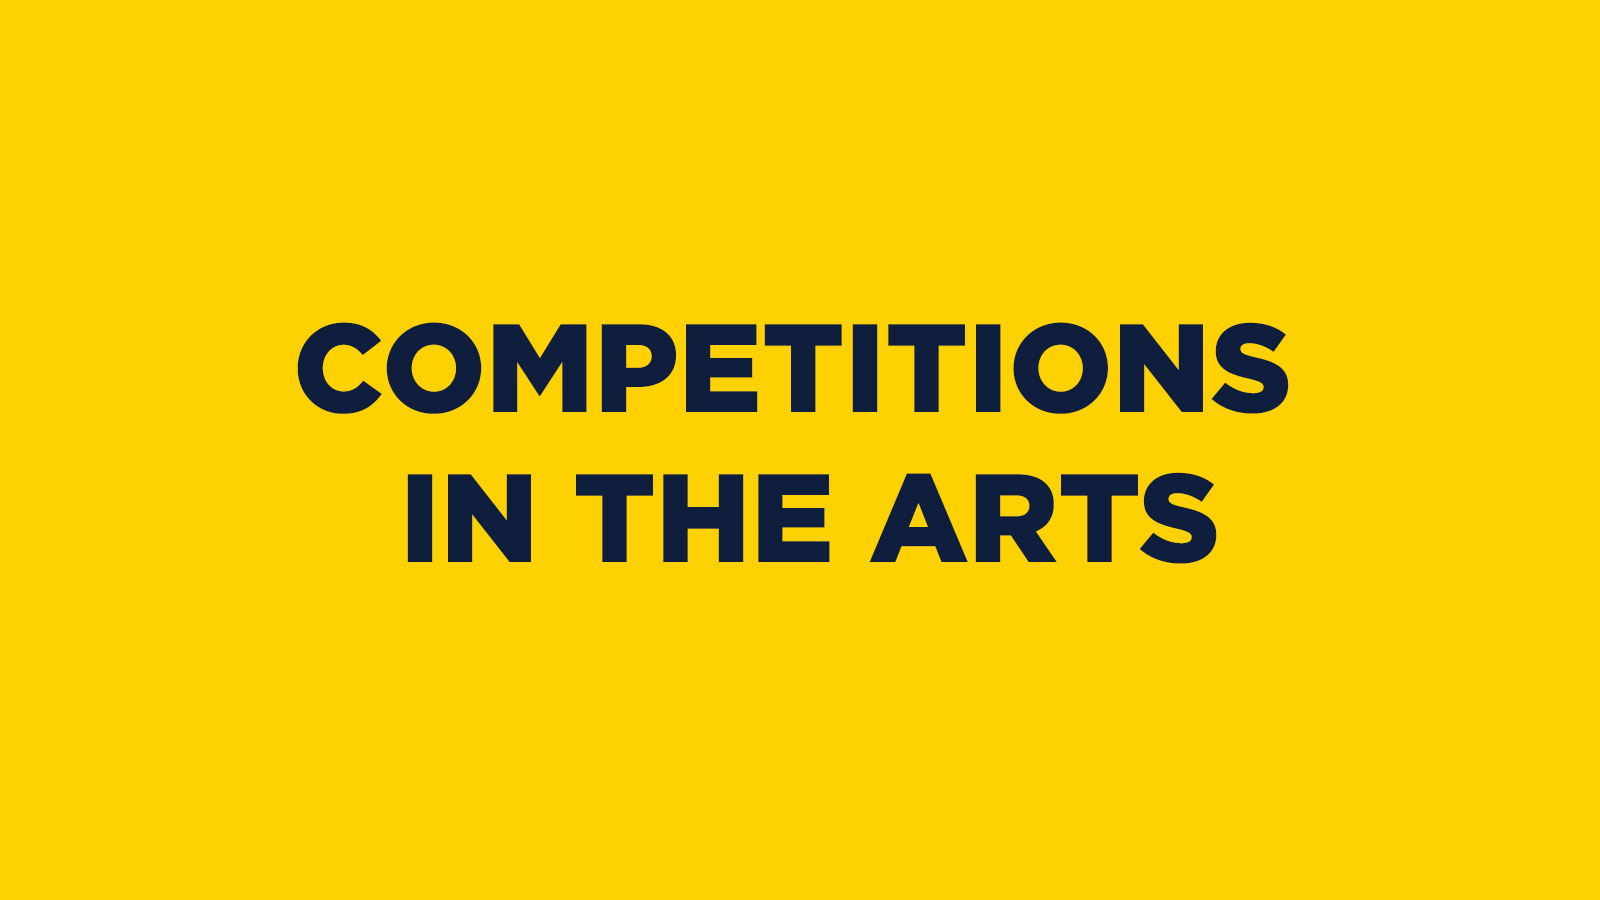 COMPETITIONS IN THE ARTS